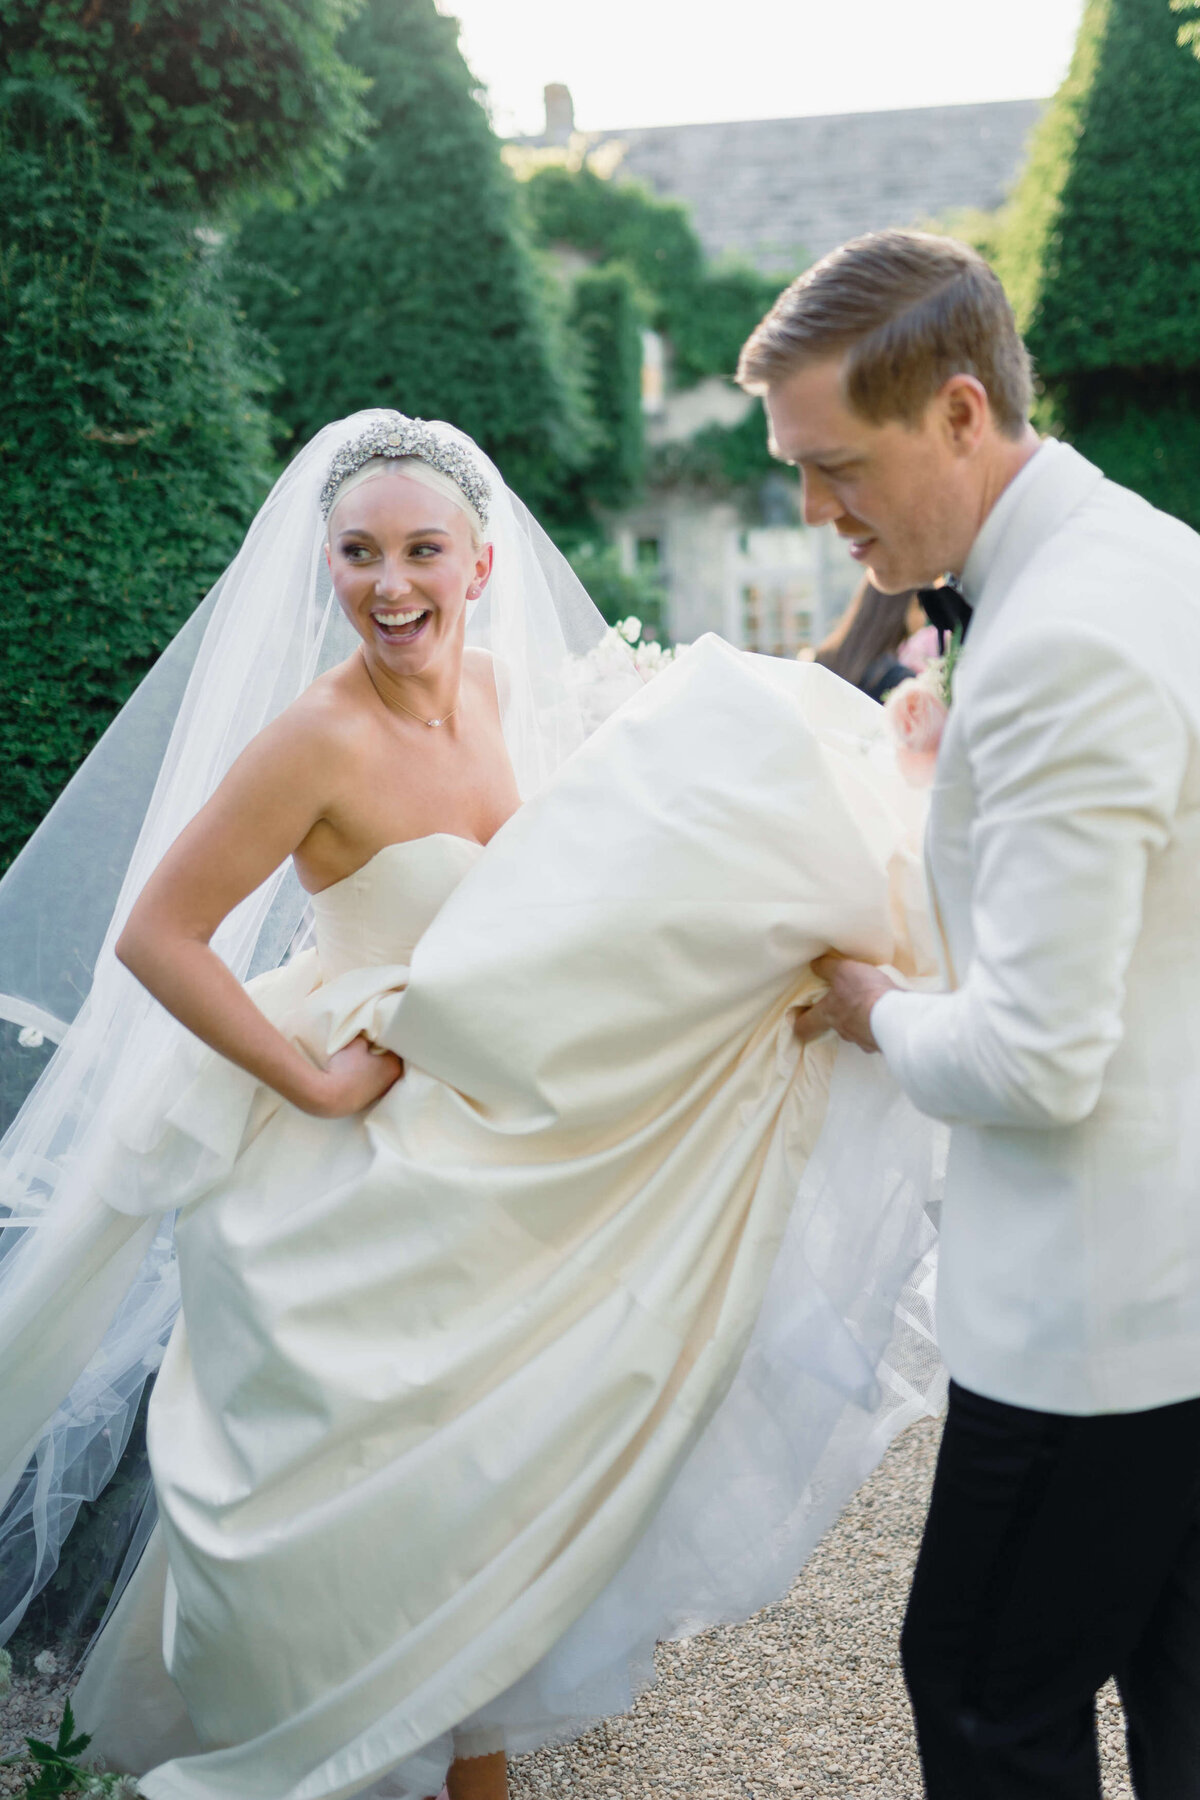 bride laughs as the groom helps her walk by lifting her wedding dress in the gardens of their romantic cotswold wedding venue at euridge manor